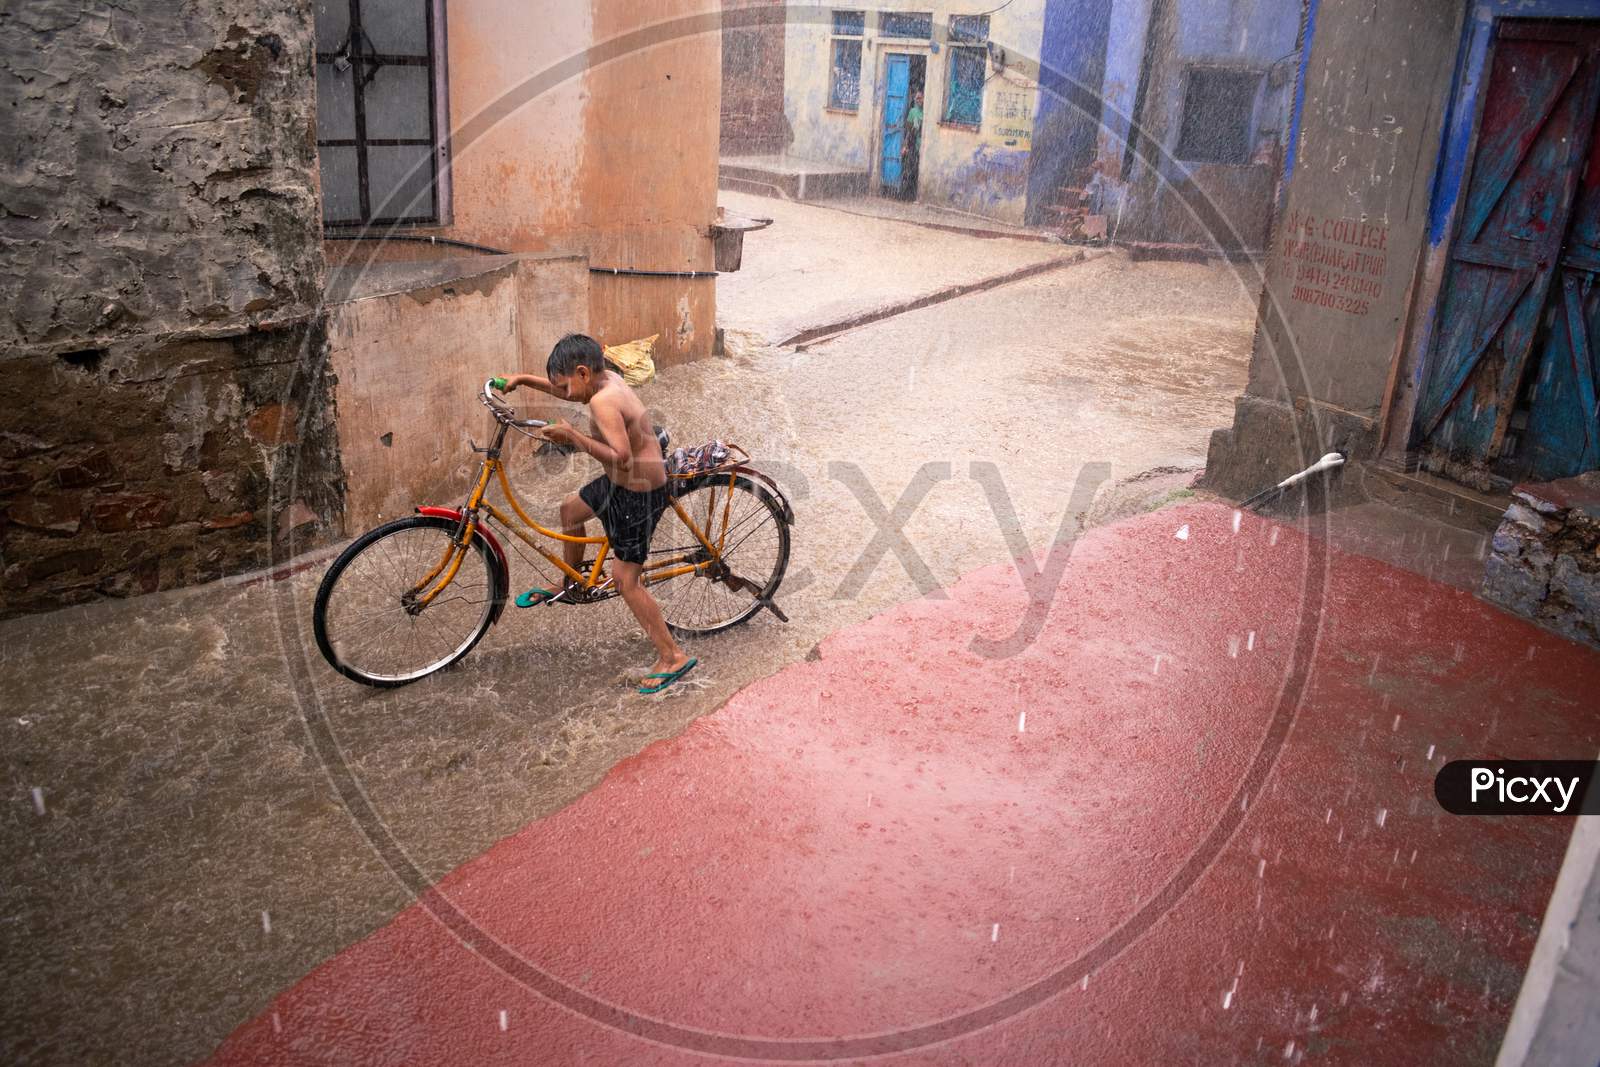 A boy riding bicycle and having fun in rain during monsoon in Bharatpur